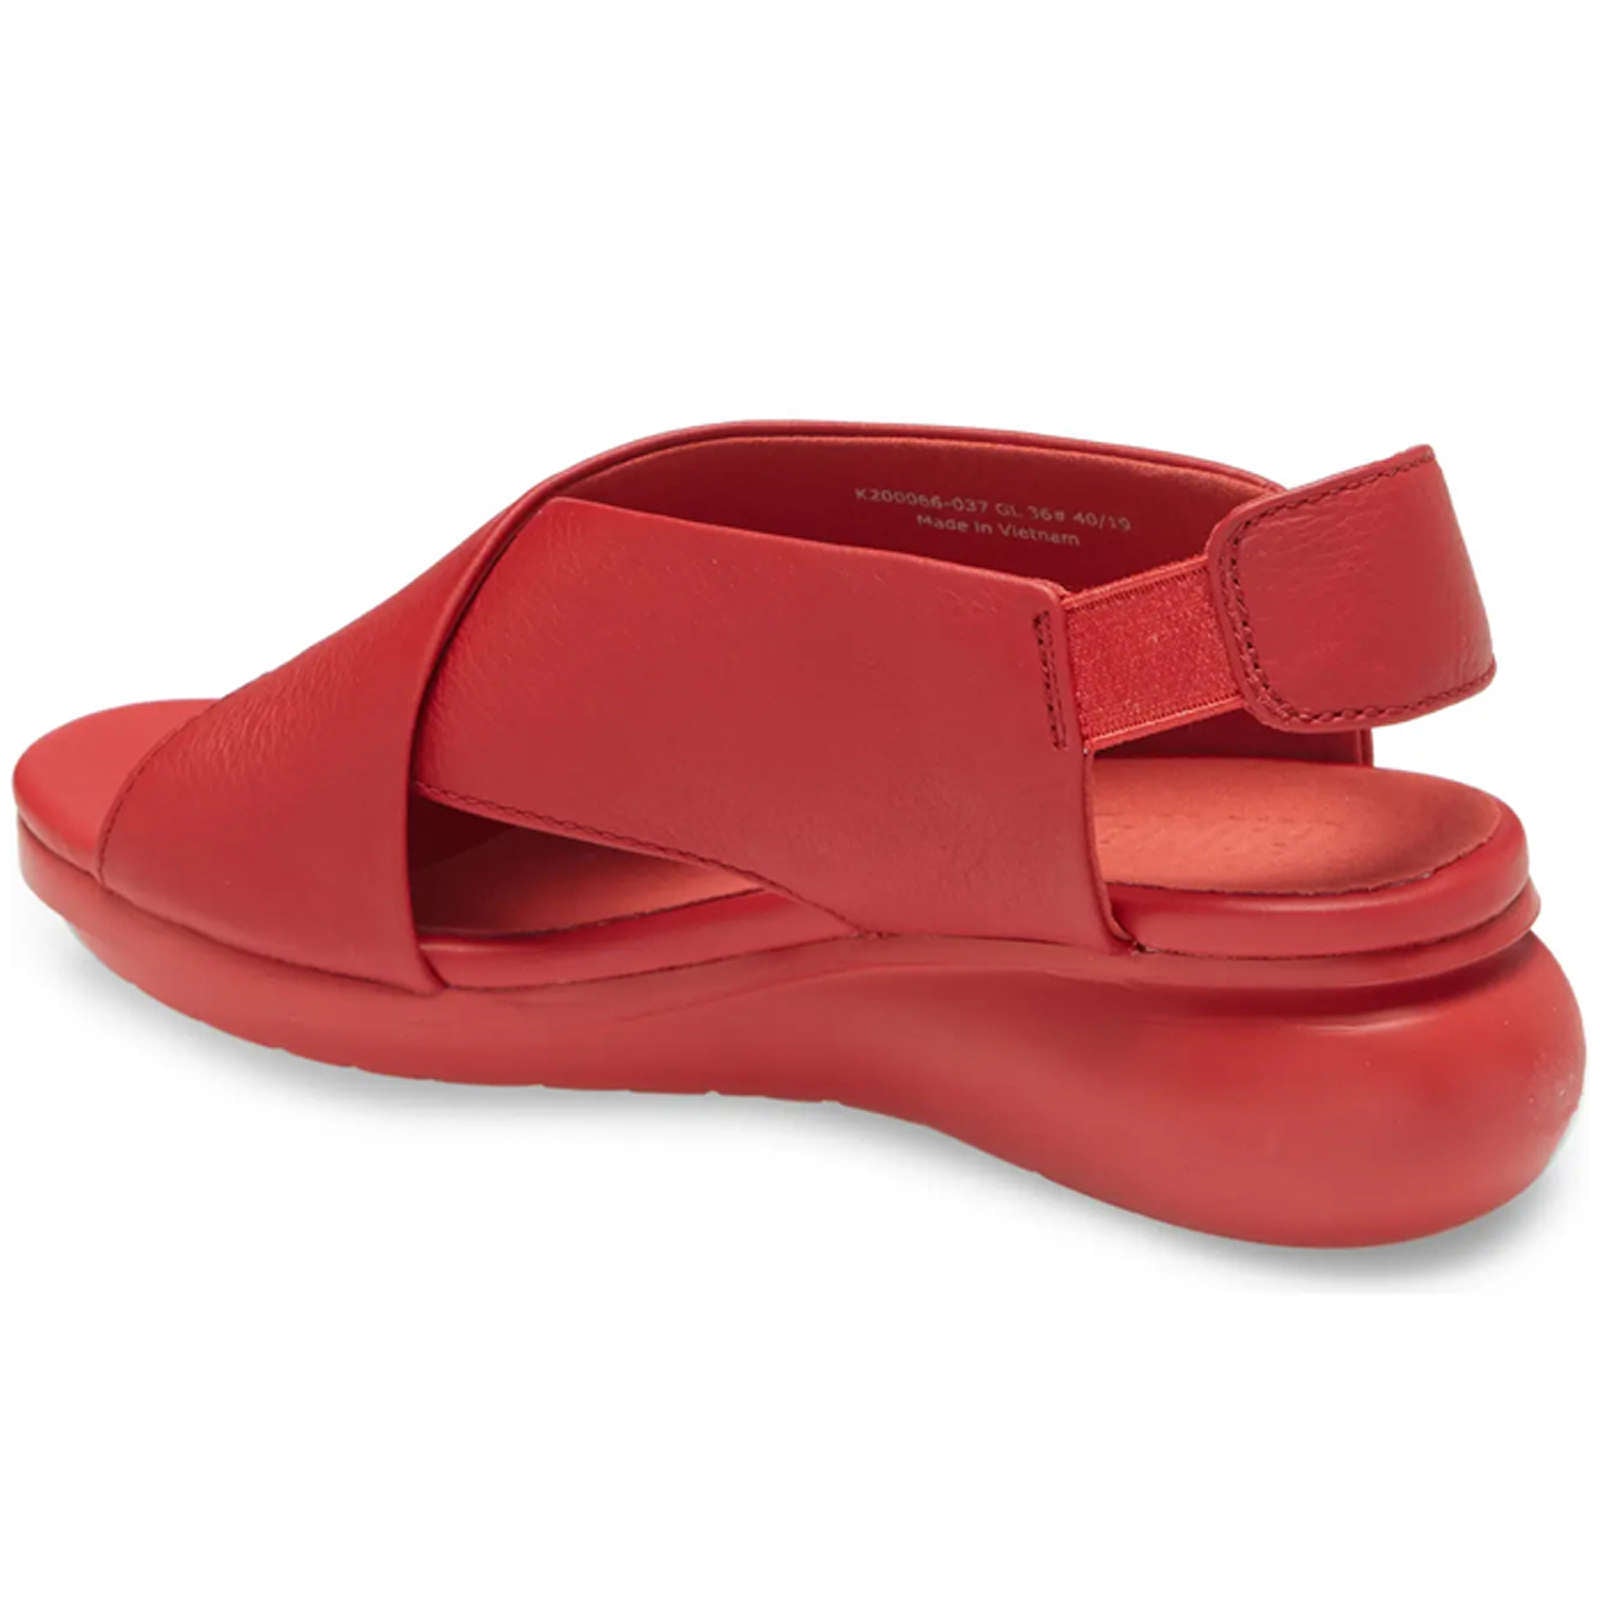 Camper Balloon Full Grain Leather Women's Open-Toe Sandals#color_red